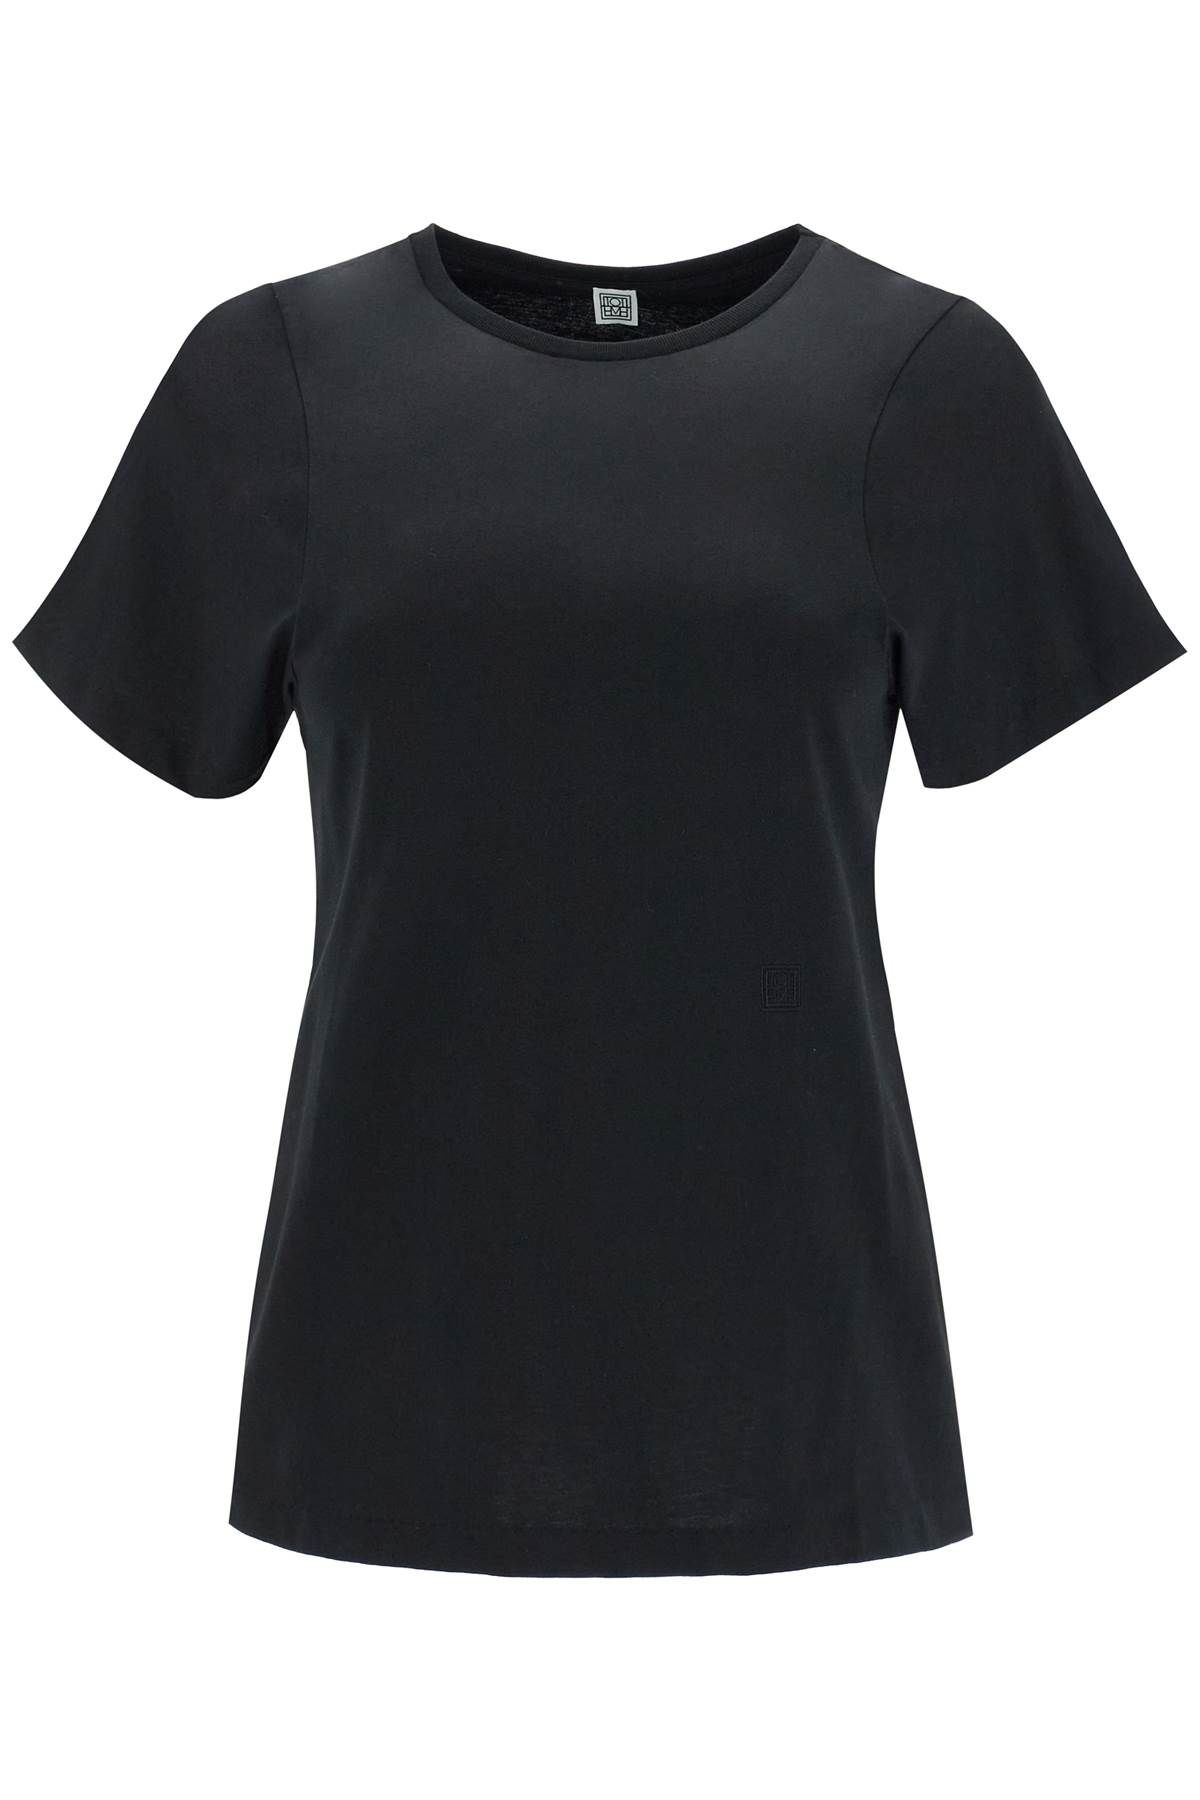 Toteme TOTEME curved seam t-shirt